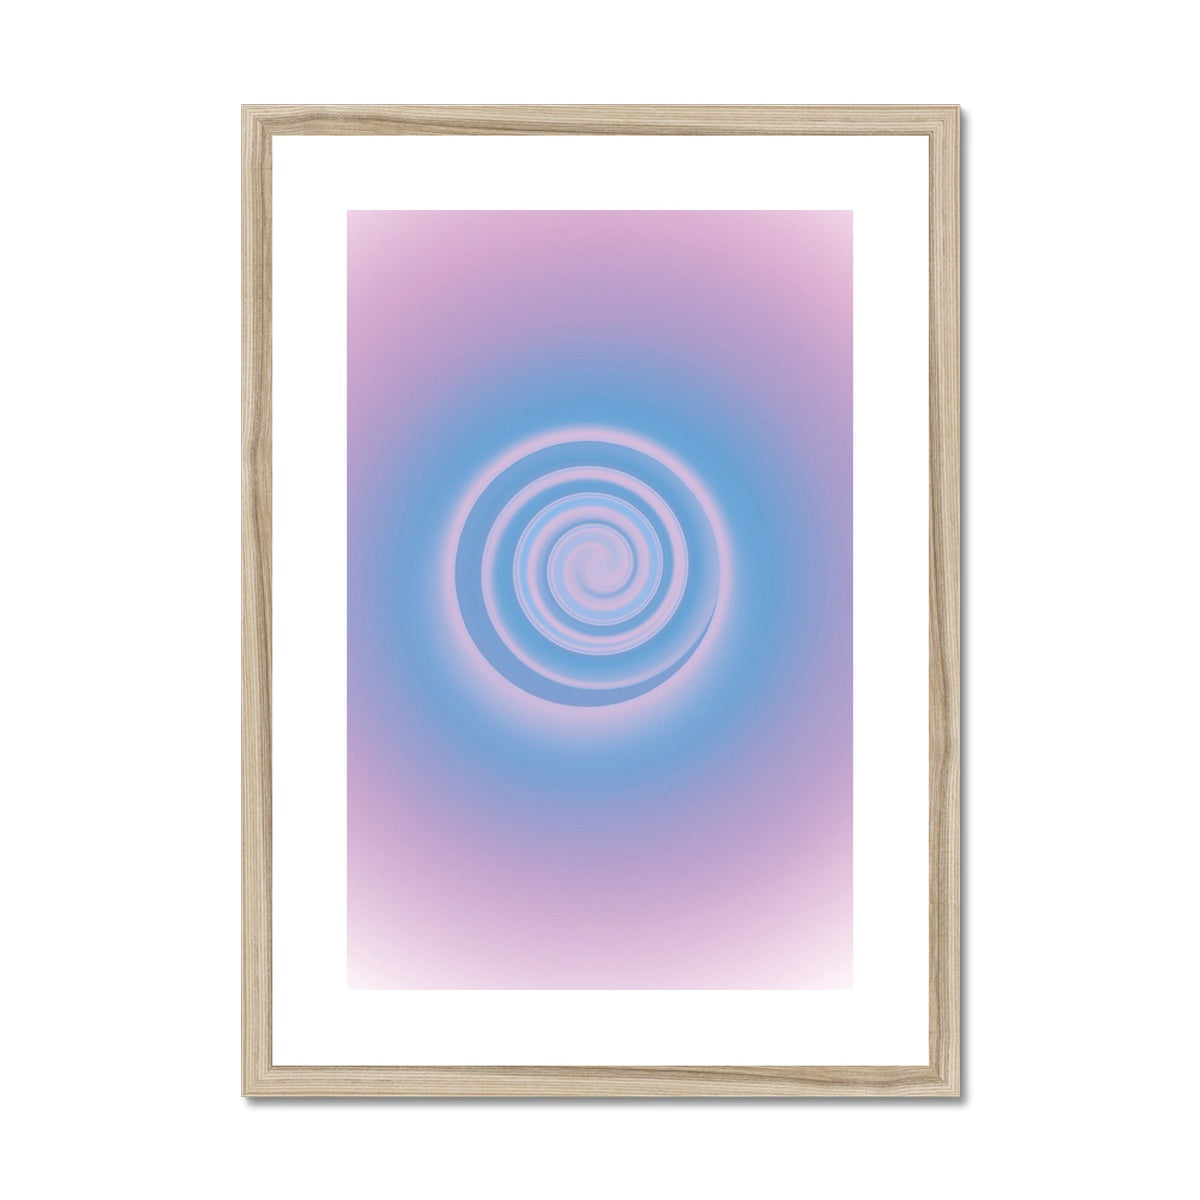 Sunset gradient aura wall art prints featuring warped pastel gradients. Colorful aura gradient posters perfect as aesthetic dorm and apartment decor.